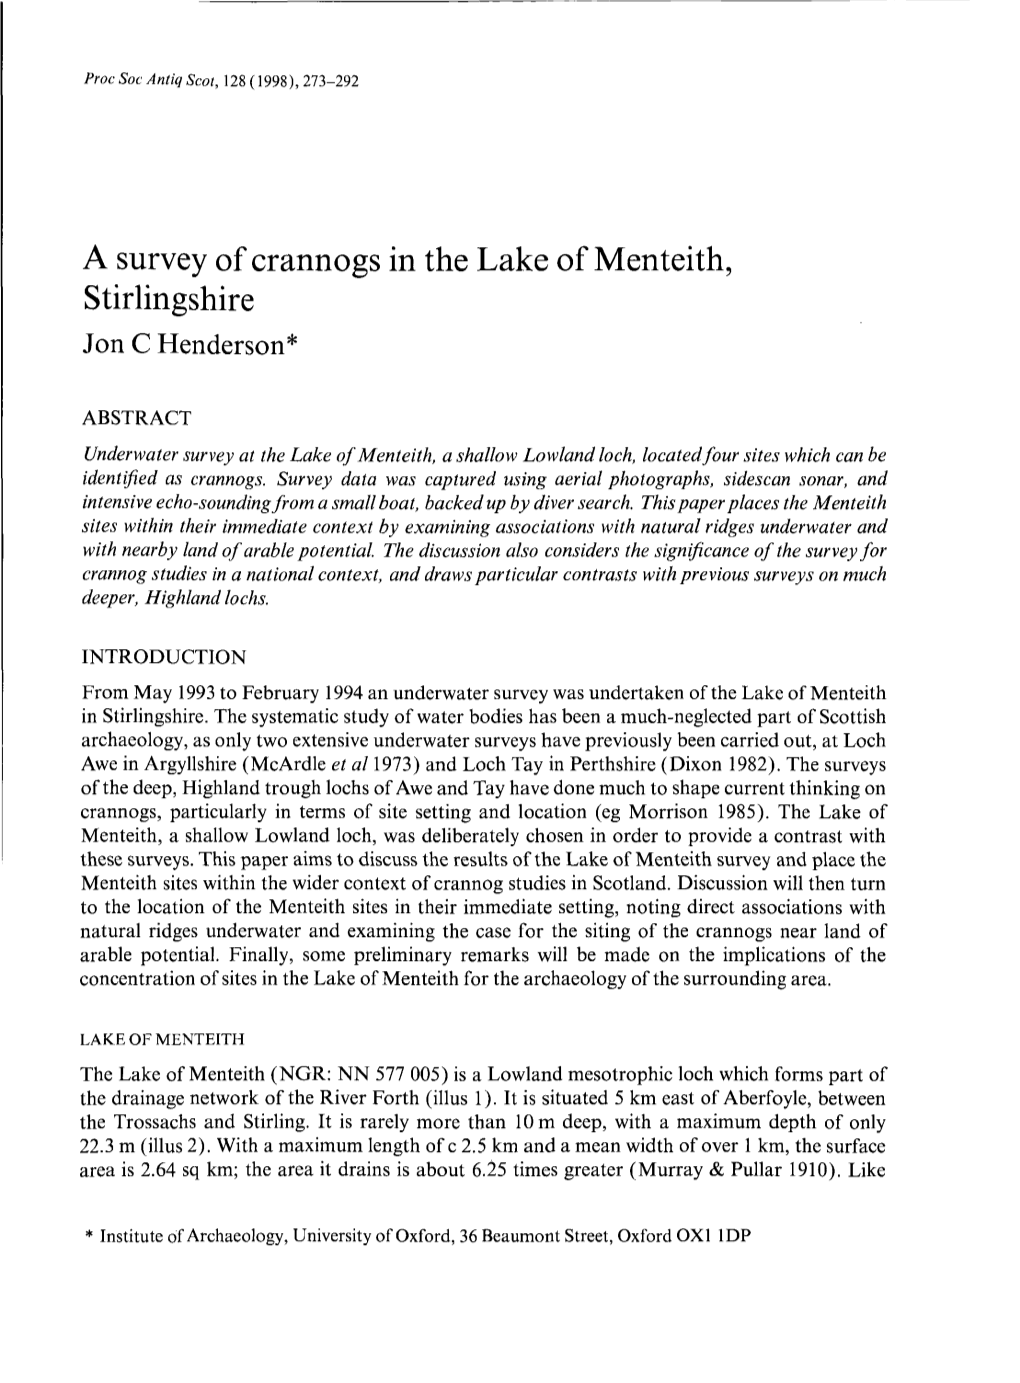 A Survey of Crannogs in the Lake of Menteith, Stirlingshire Hendersonc N Jo *